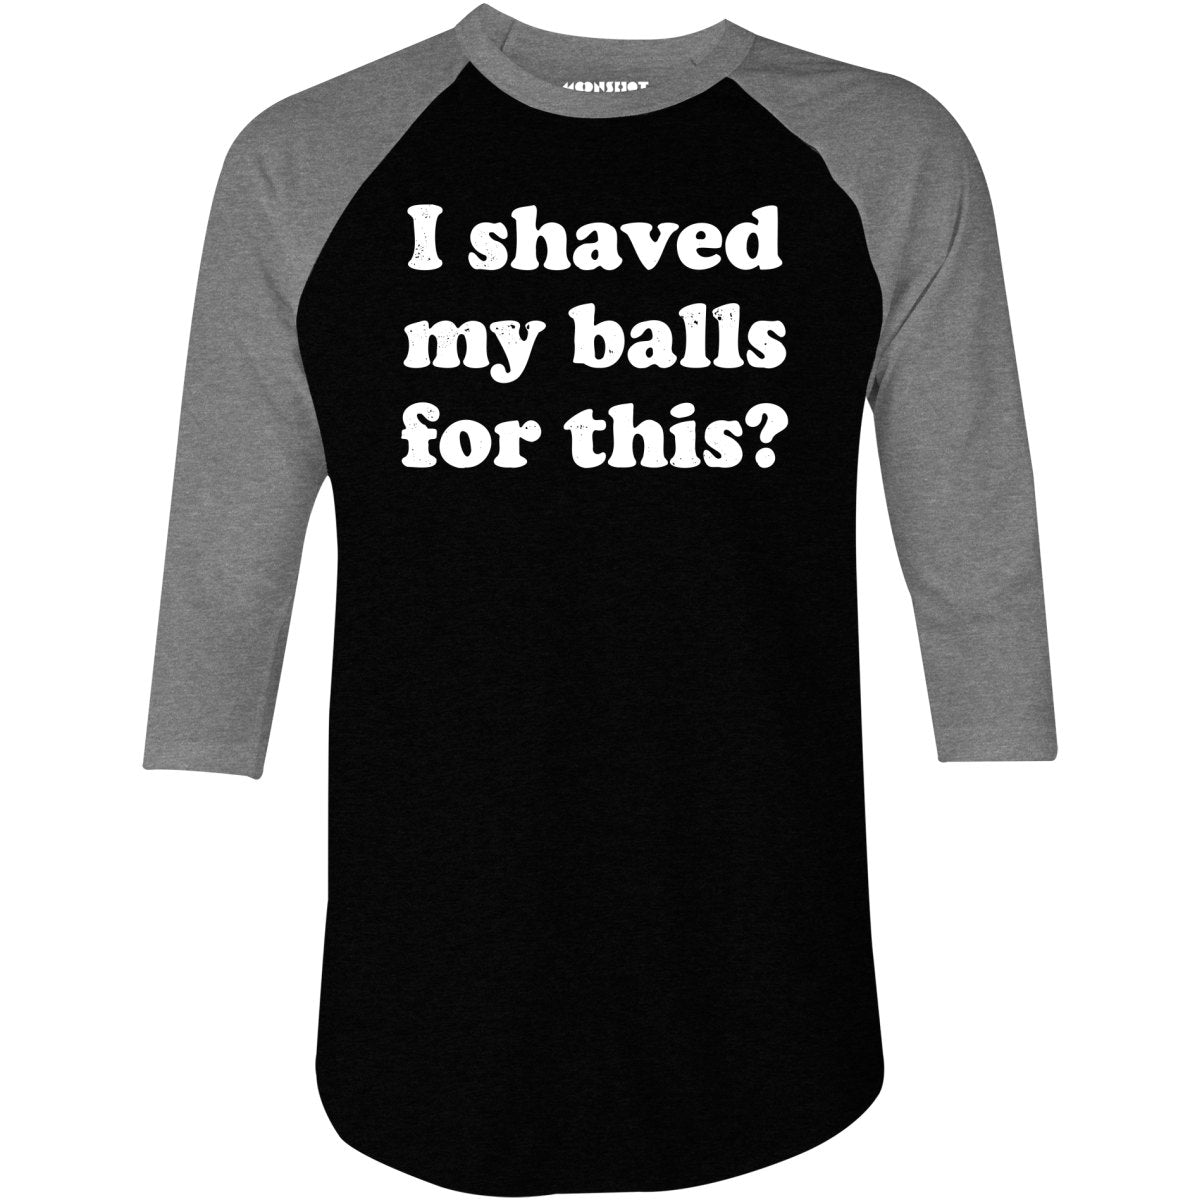 I Shaved My Balls For This? - 3/4 Sleeve Raglan T-Shirt